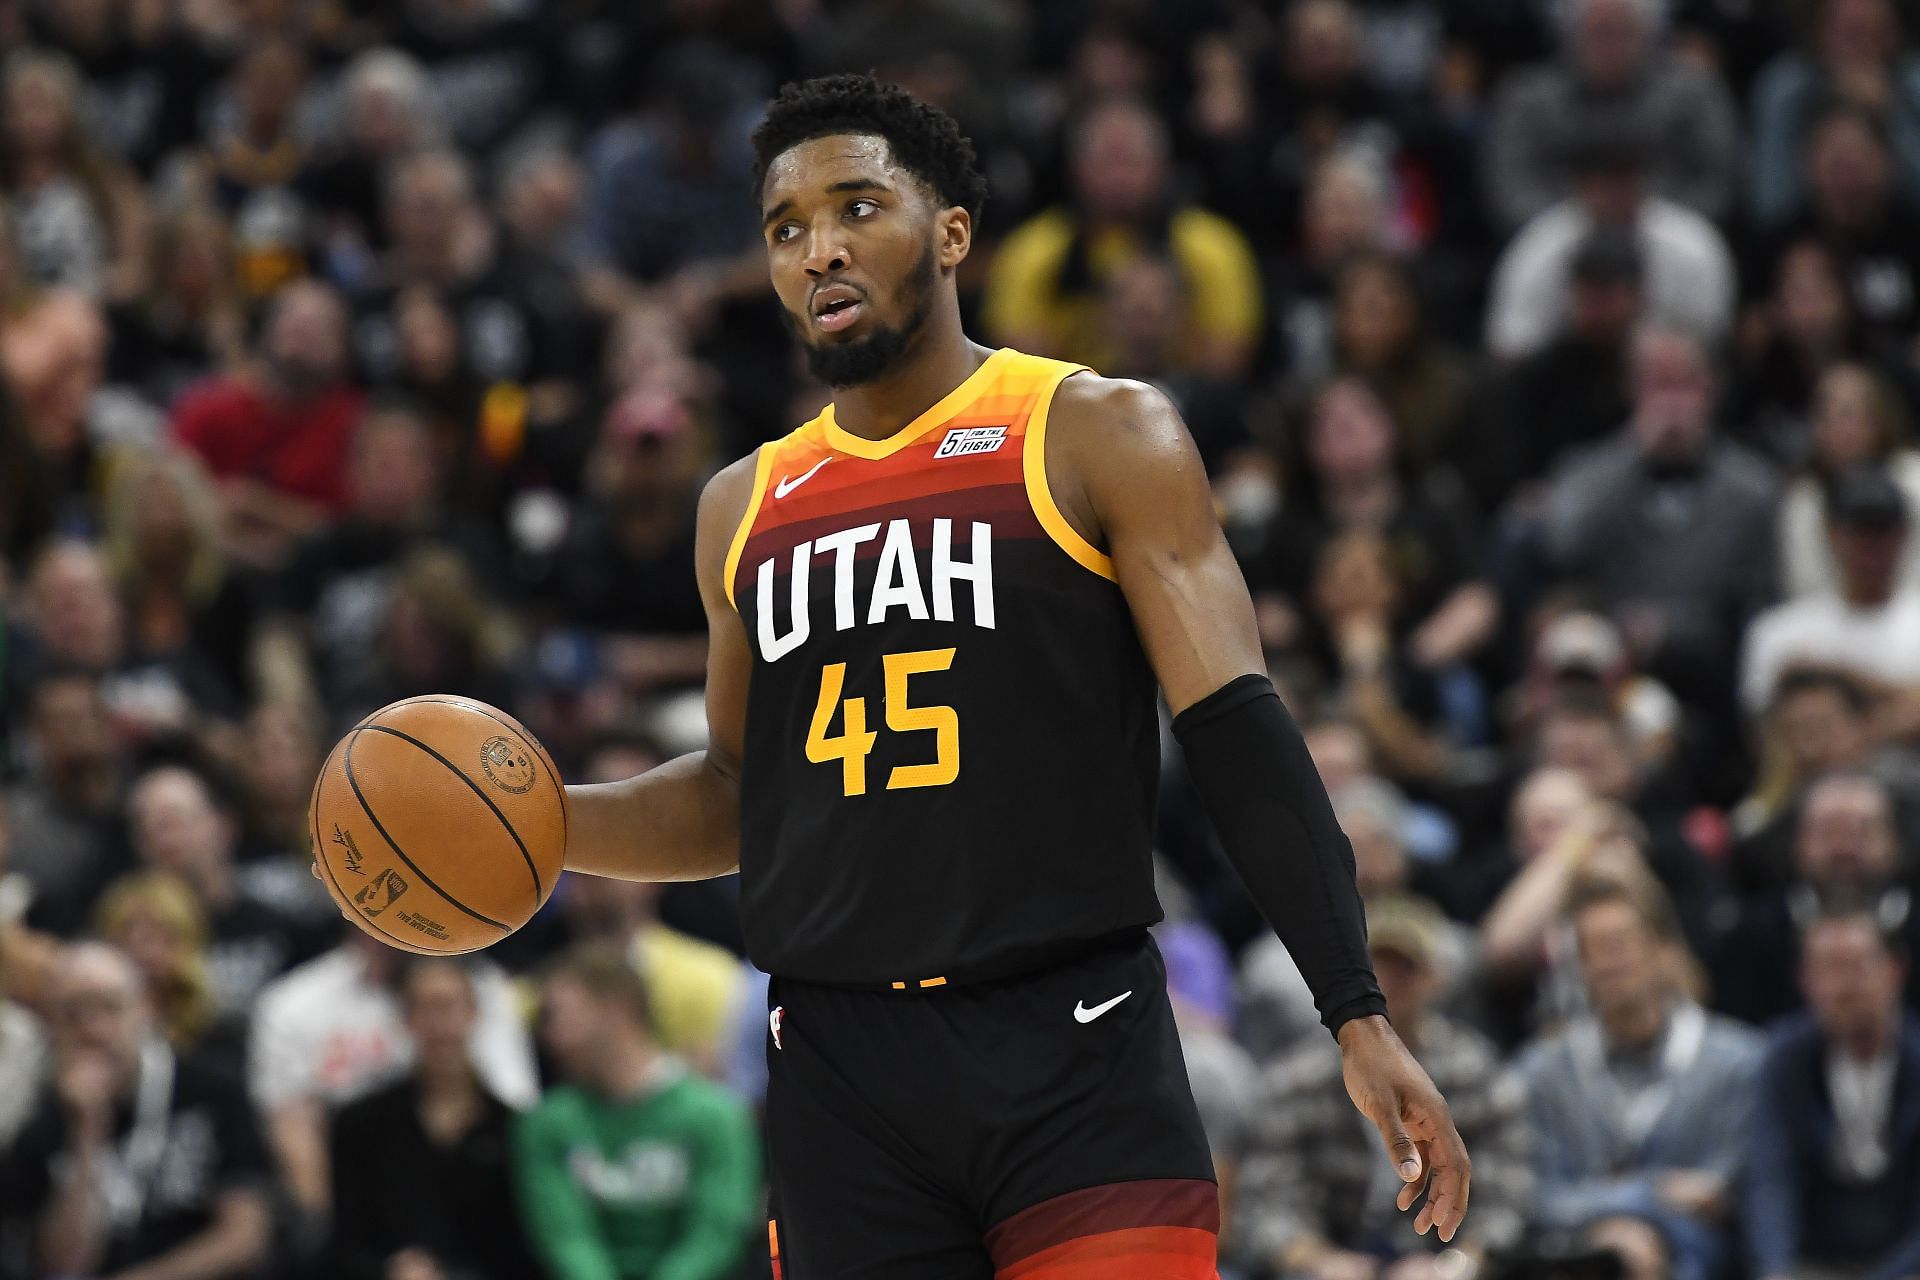 Donovan Mitchell of the Utah Jazz in the 2022 NBA playoffs